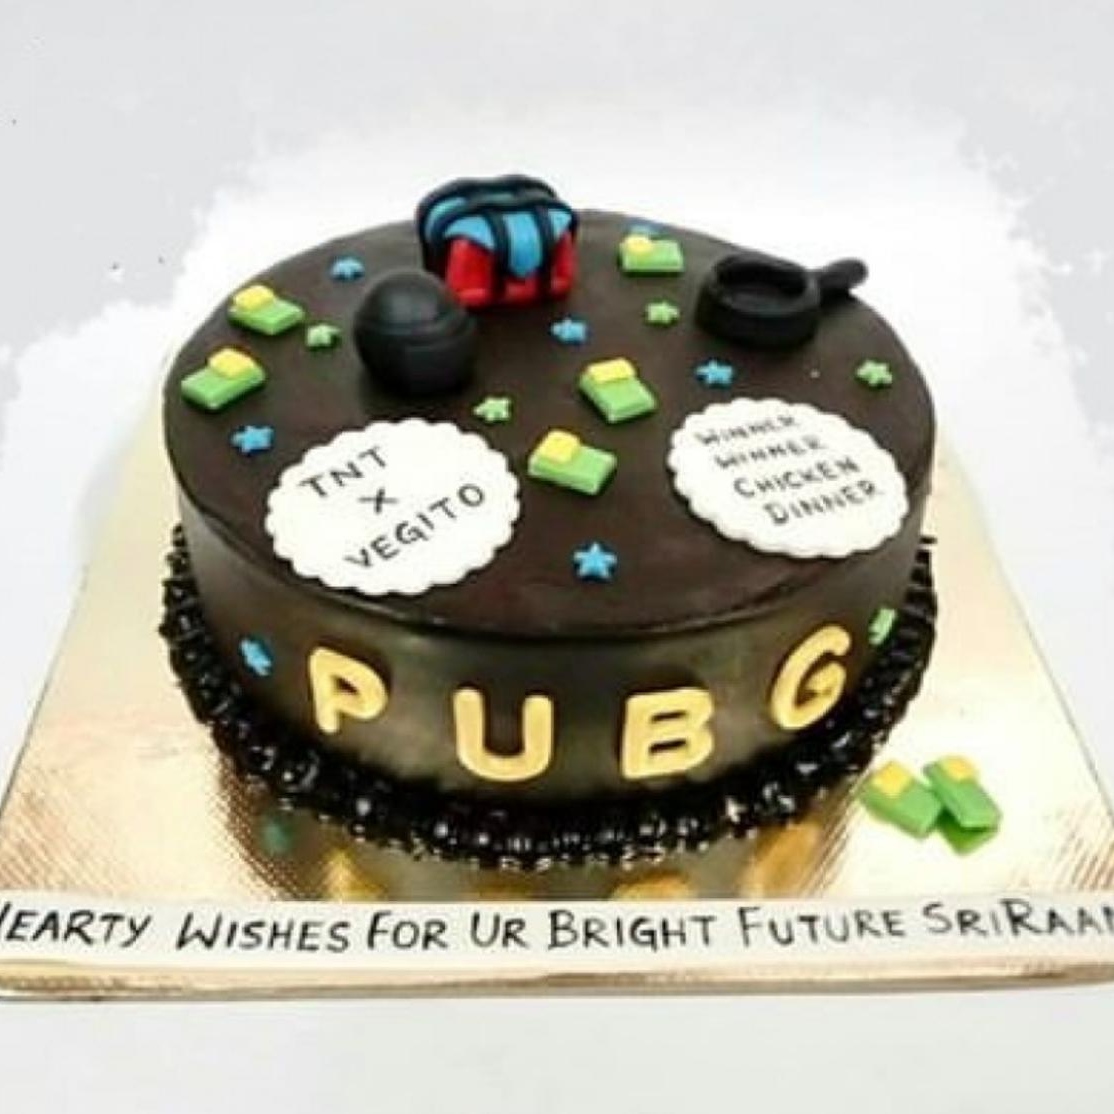 PUBG Chocolate Cake Delivery in Delhi NCR - ₹1,249.00 Cake Express